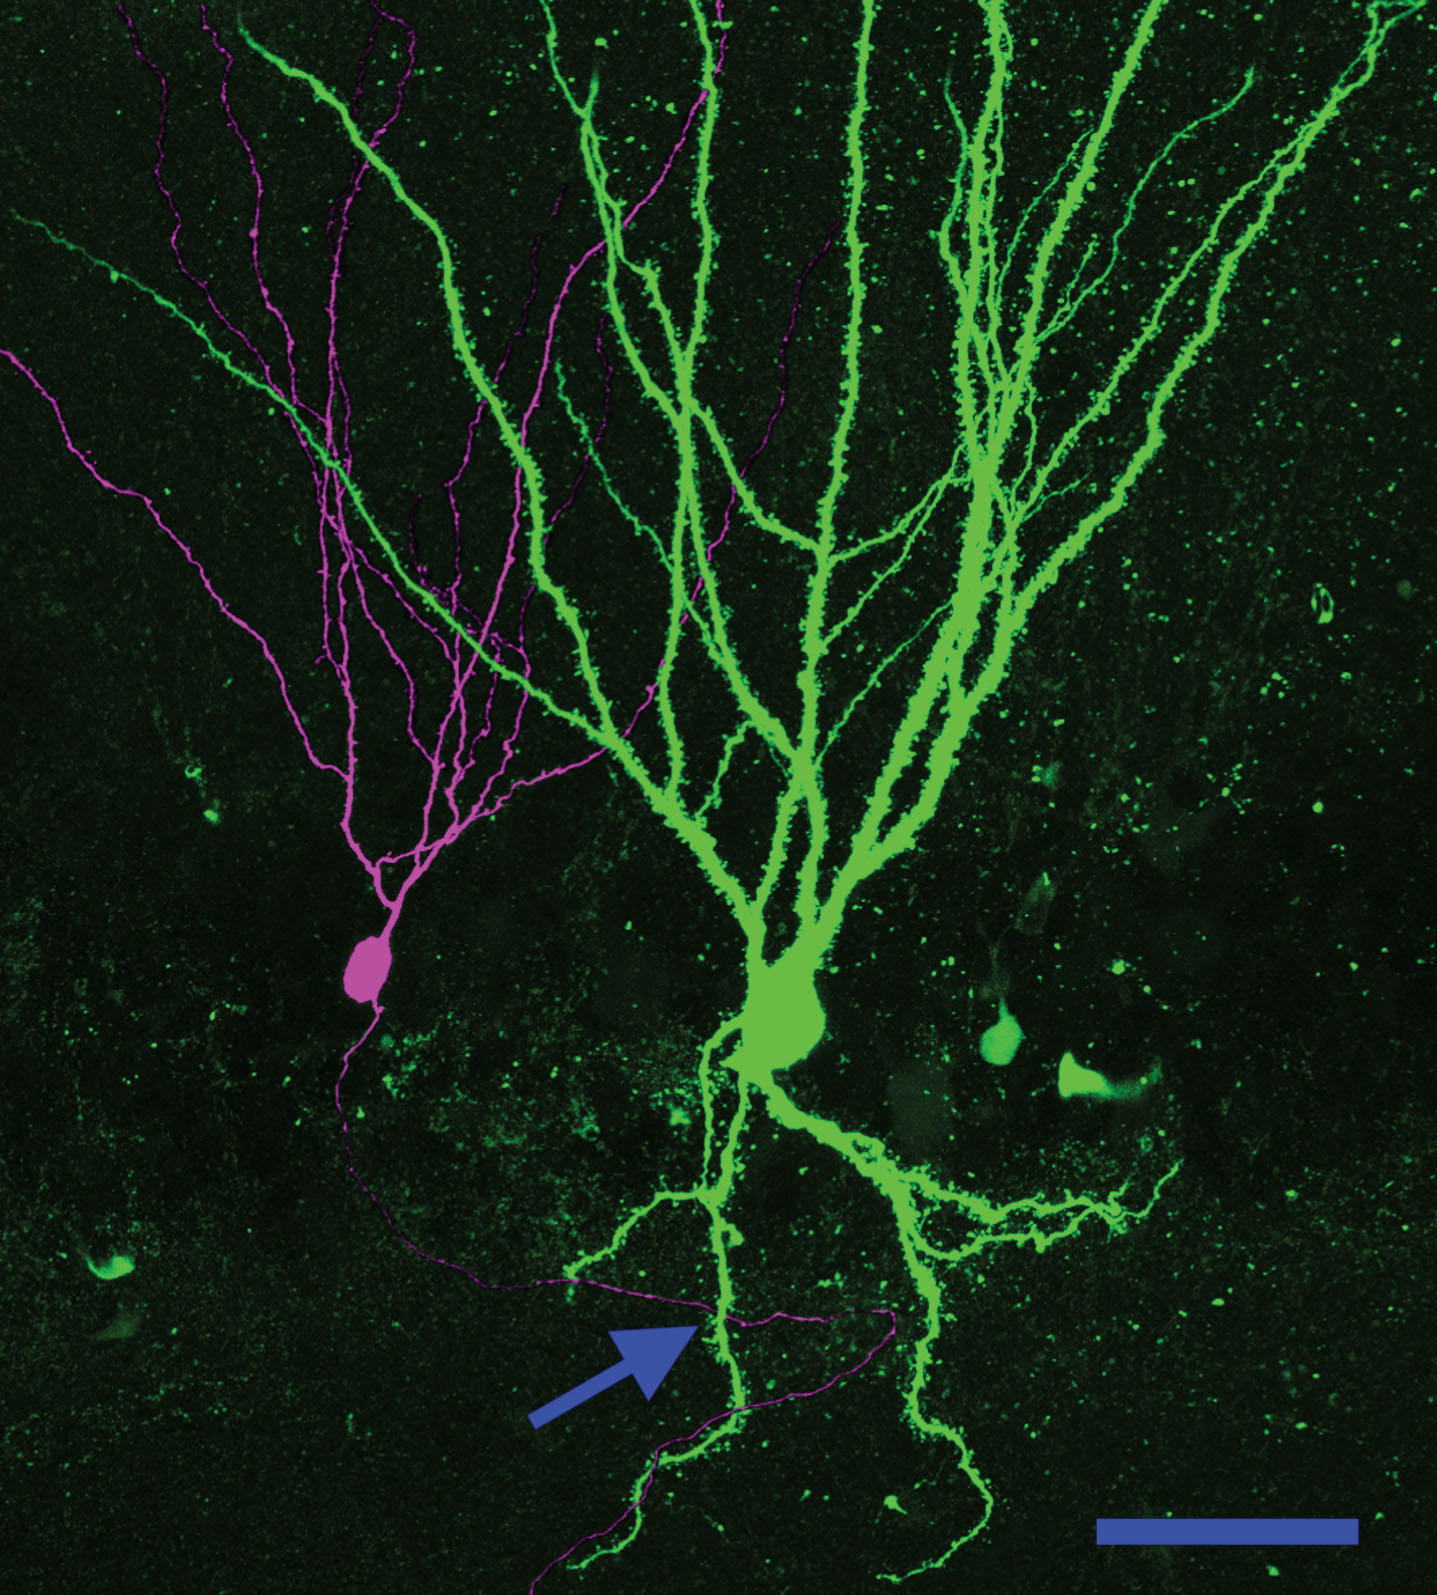 Basal dendrites create a new pathway for recurrent excitatory contacts in the epileptic dentate gyrus. Neuronal reconstruction shows a biocytin-filled PTEN KO cell (green) and a biocytin-filled PTEN-expressing (purple) cell from a PTEN KO (Gli1-CreERT2, PTENfl/fl) mouse. The KO cell exhibits a large basal dendrite. The arrow denotes a point where the axon of the wildtype cell occupies the same focal plane in the z-axis as the PTEN KO cell basal dendrite, suggesting that a synaptic contact could be formed. Scale bar = 50μm.